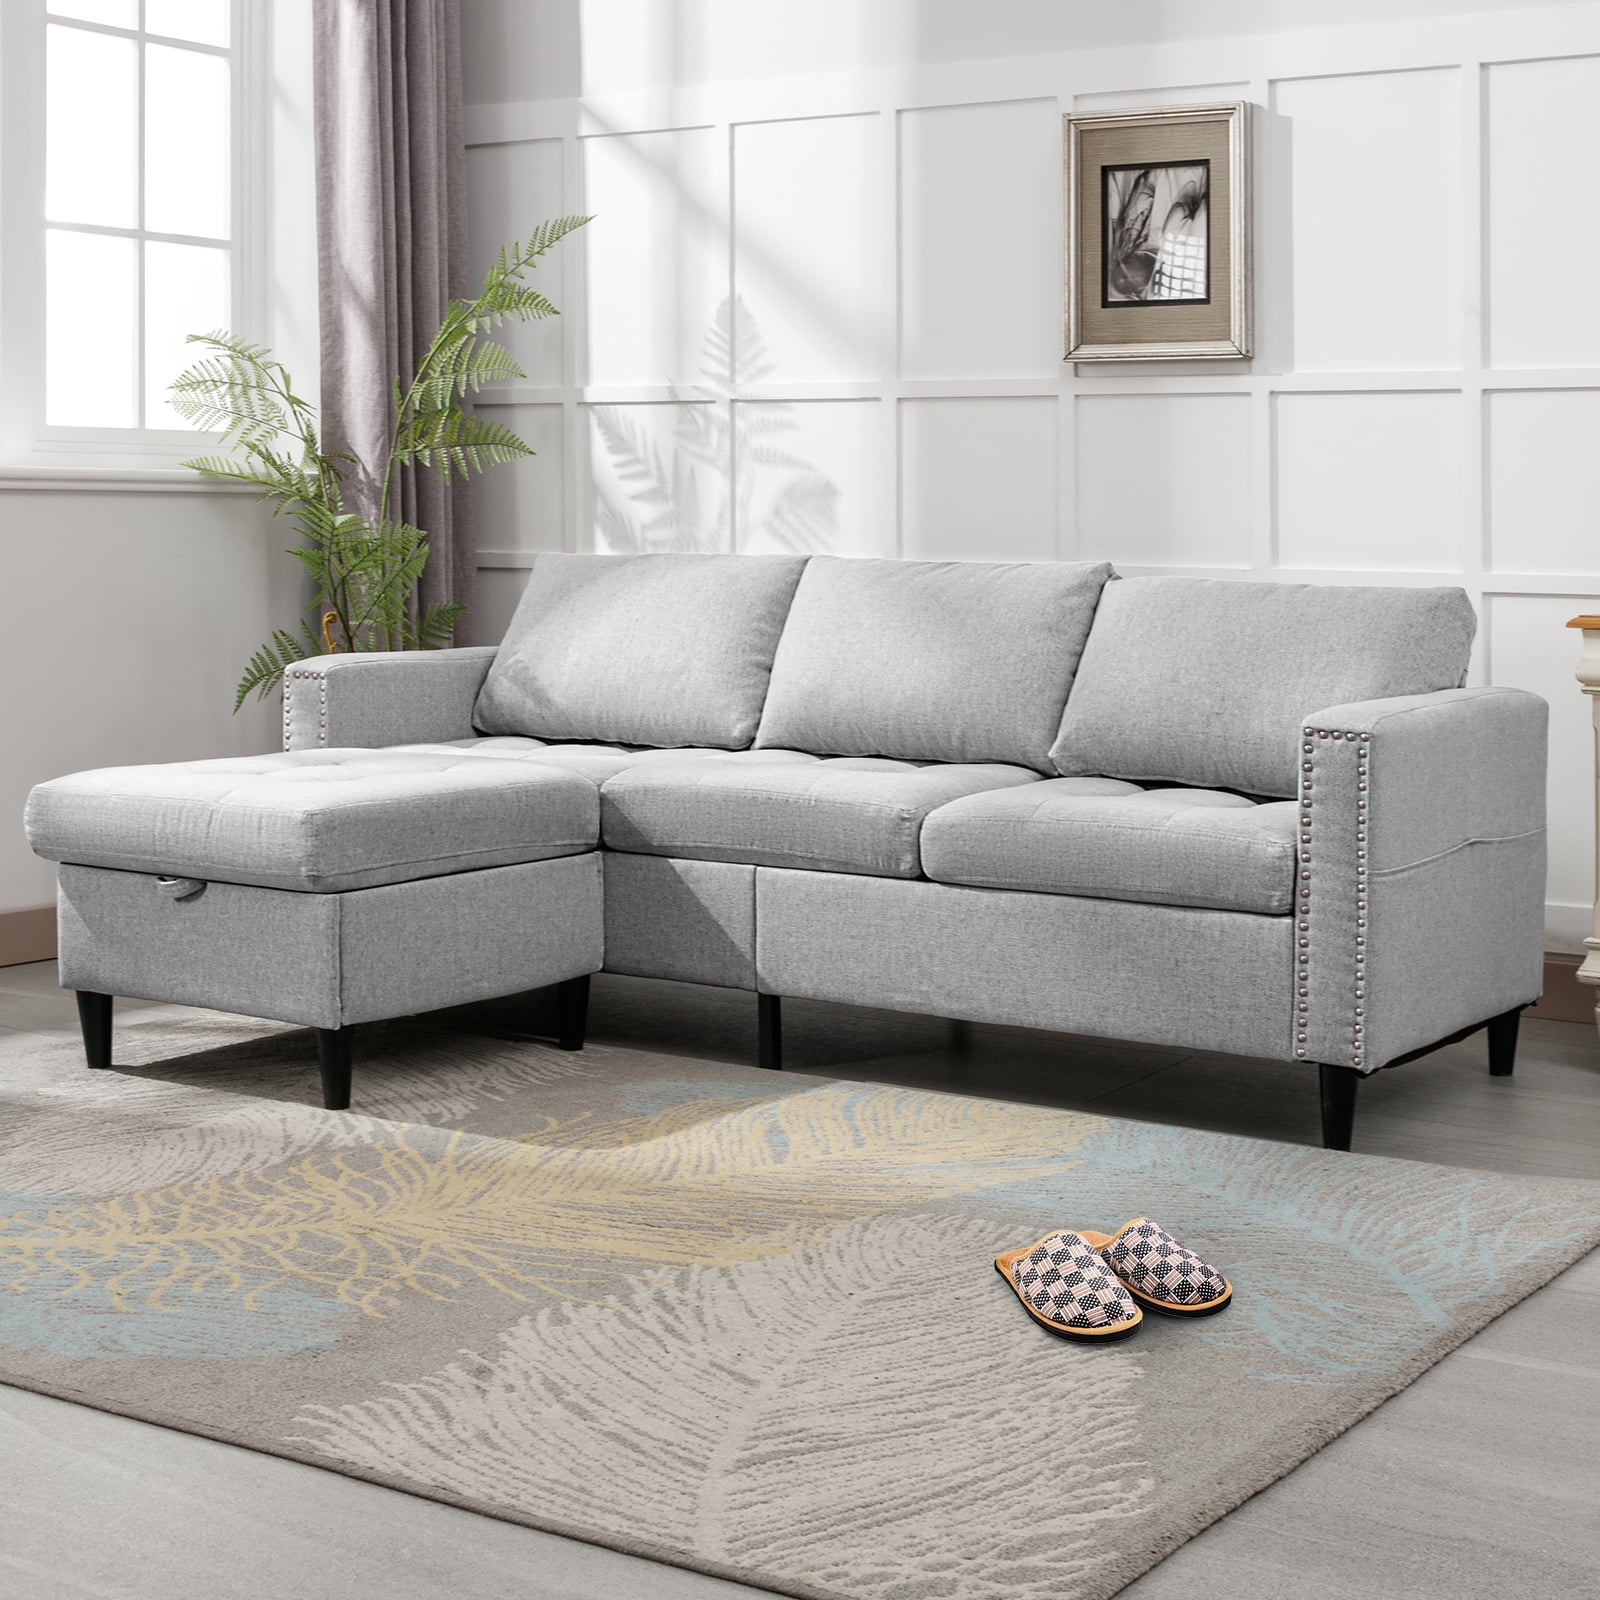 Zafly Reversible Sectional Couch Set 3